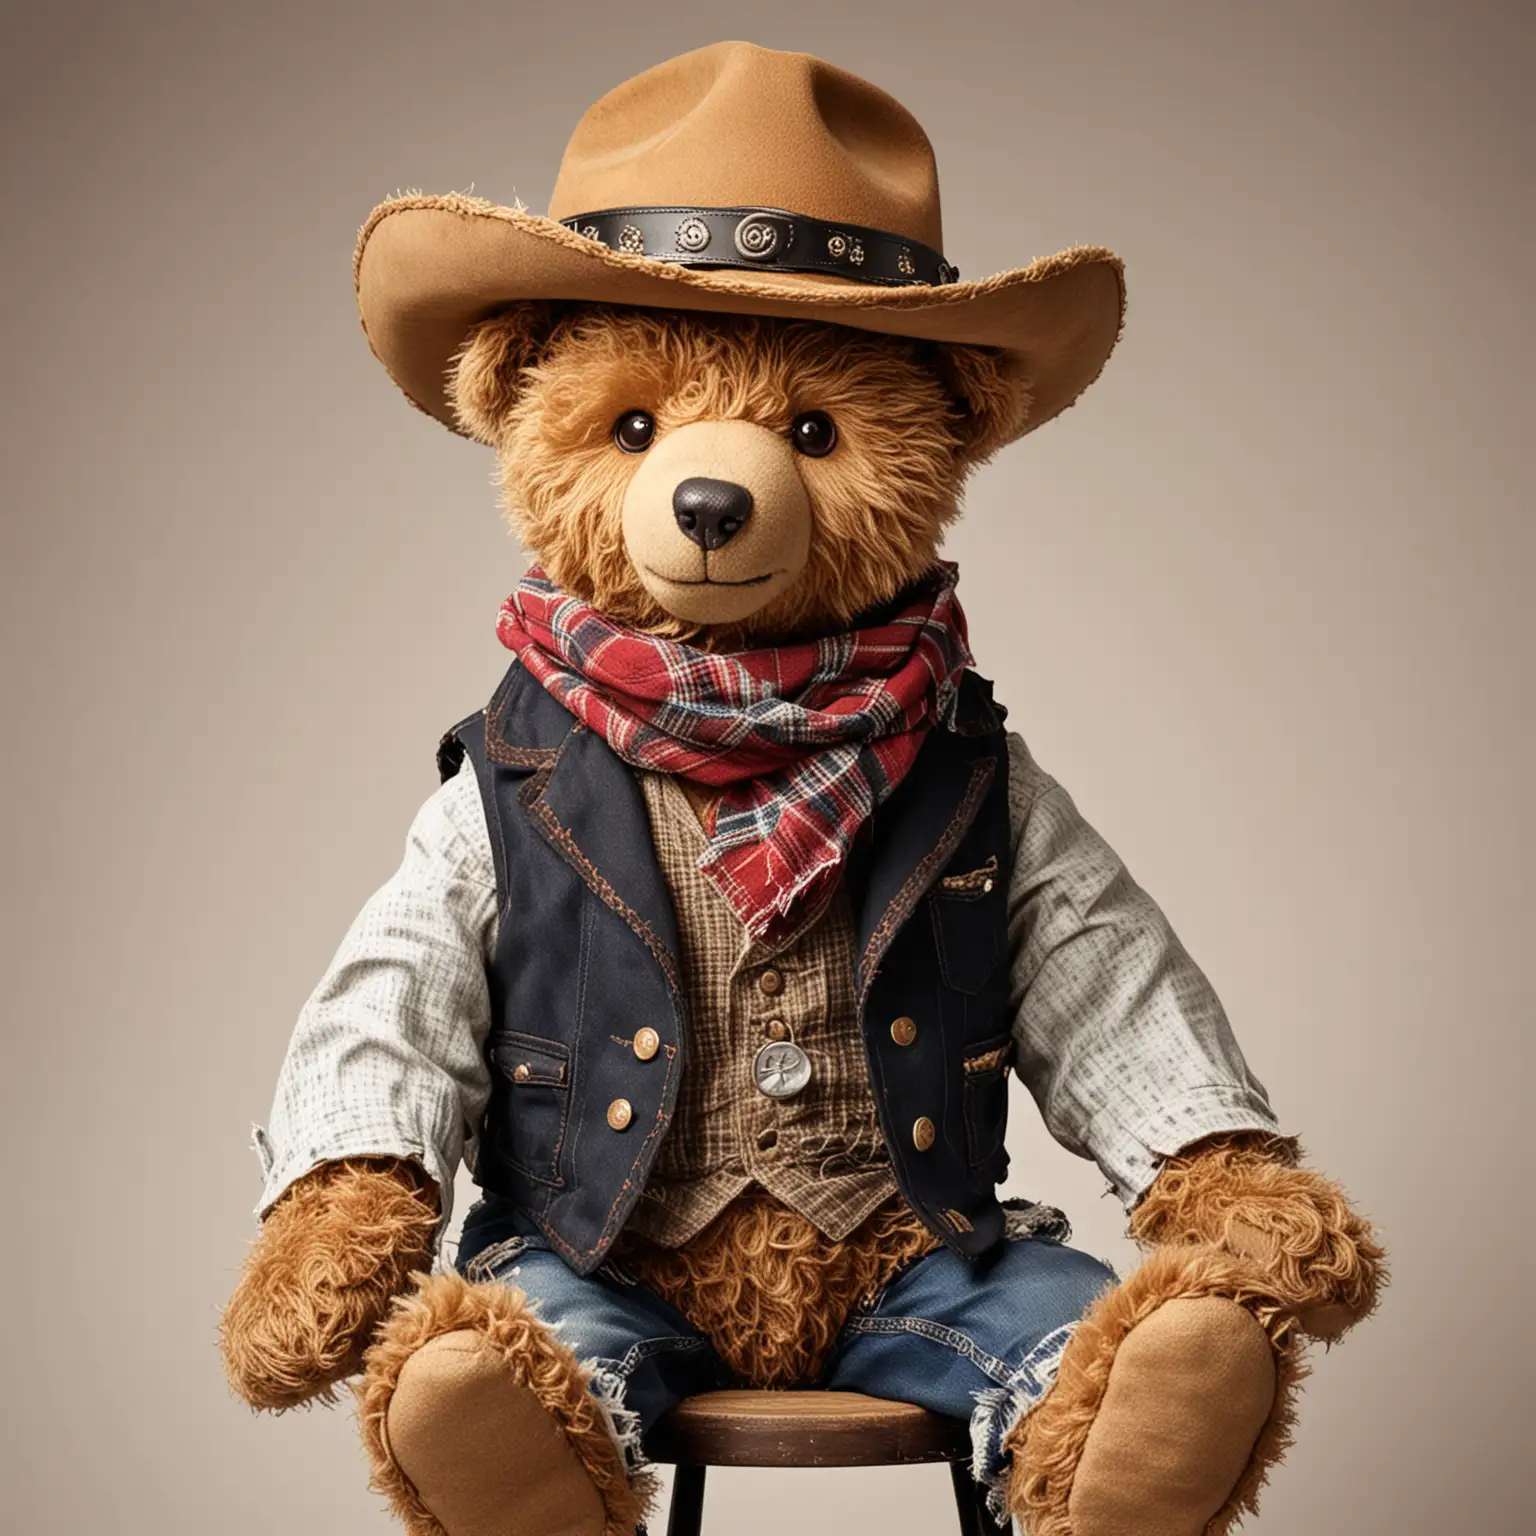 Battered old vintage Teddy Bear Cowboy, sitting on a barstool, dressed as a cowboy with hat, scarf, waistcoat, with shotglass in hand, blank background